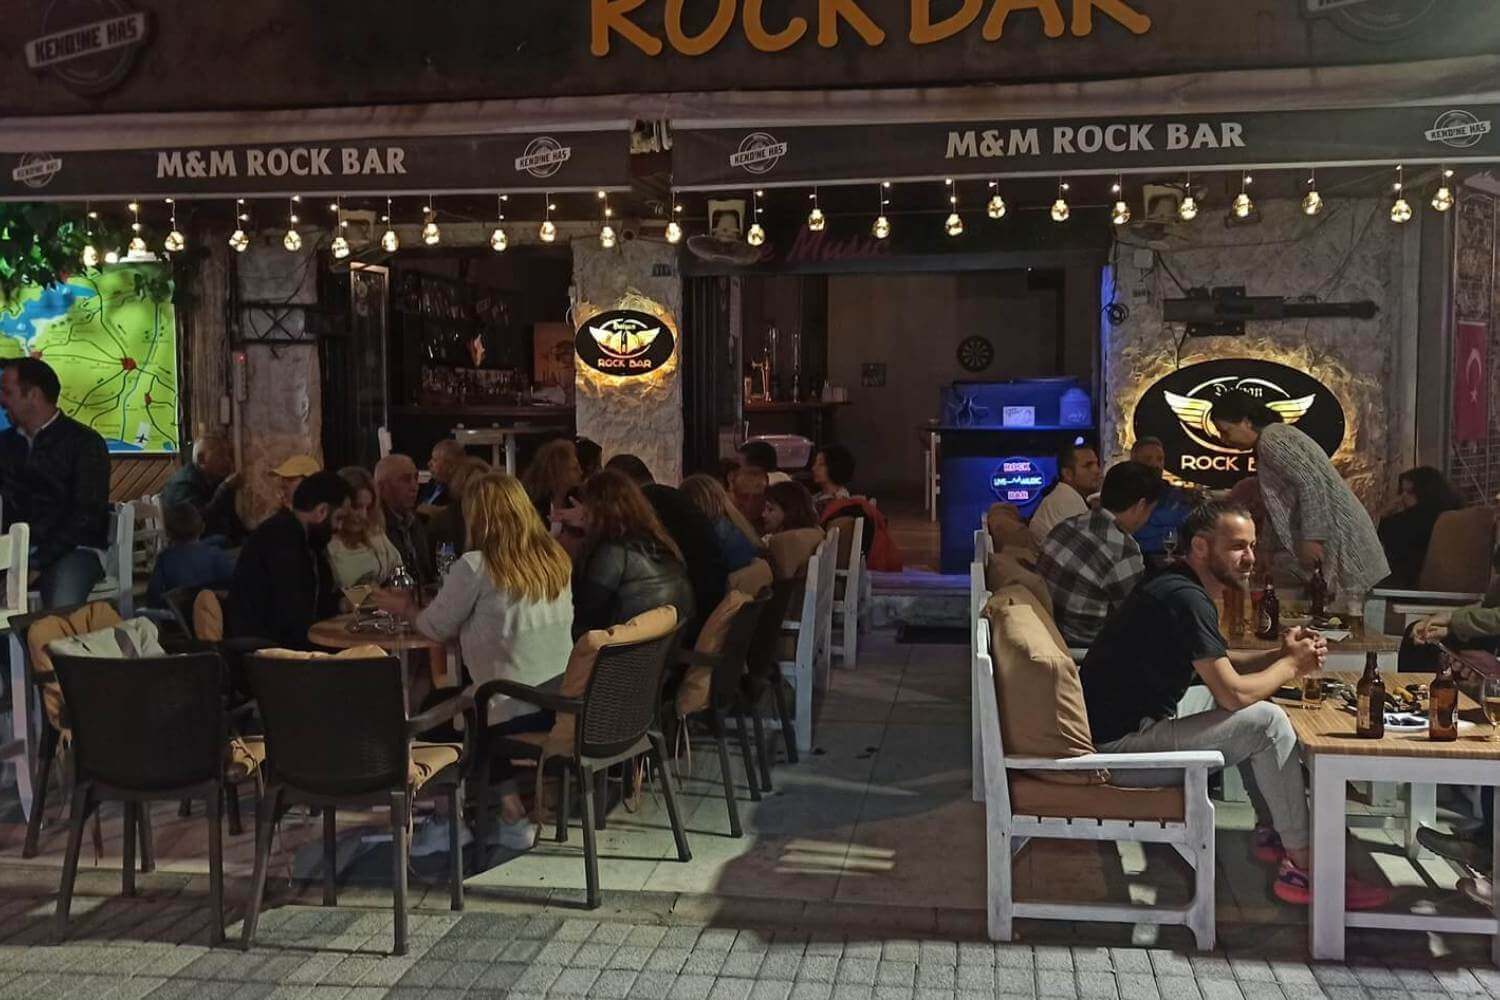 Dalyan Rock Bar, Dalyan nights are lively and pleasant